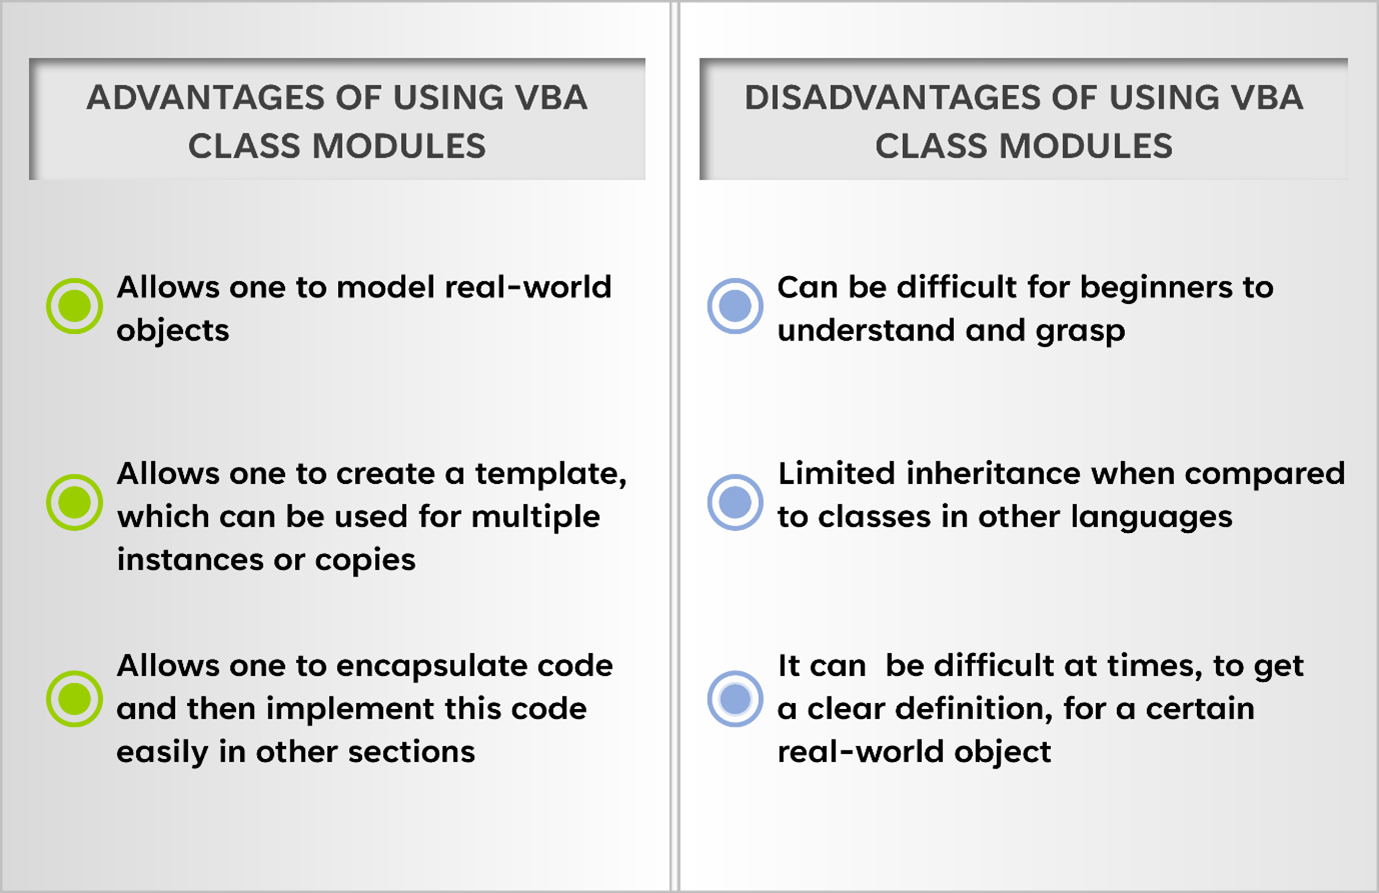 Graphic showing the advantages versus the disadvantages of using VBA Class Modules.